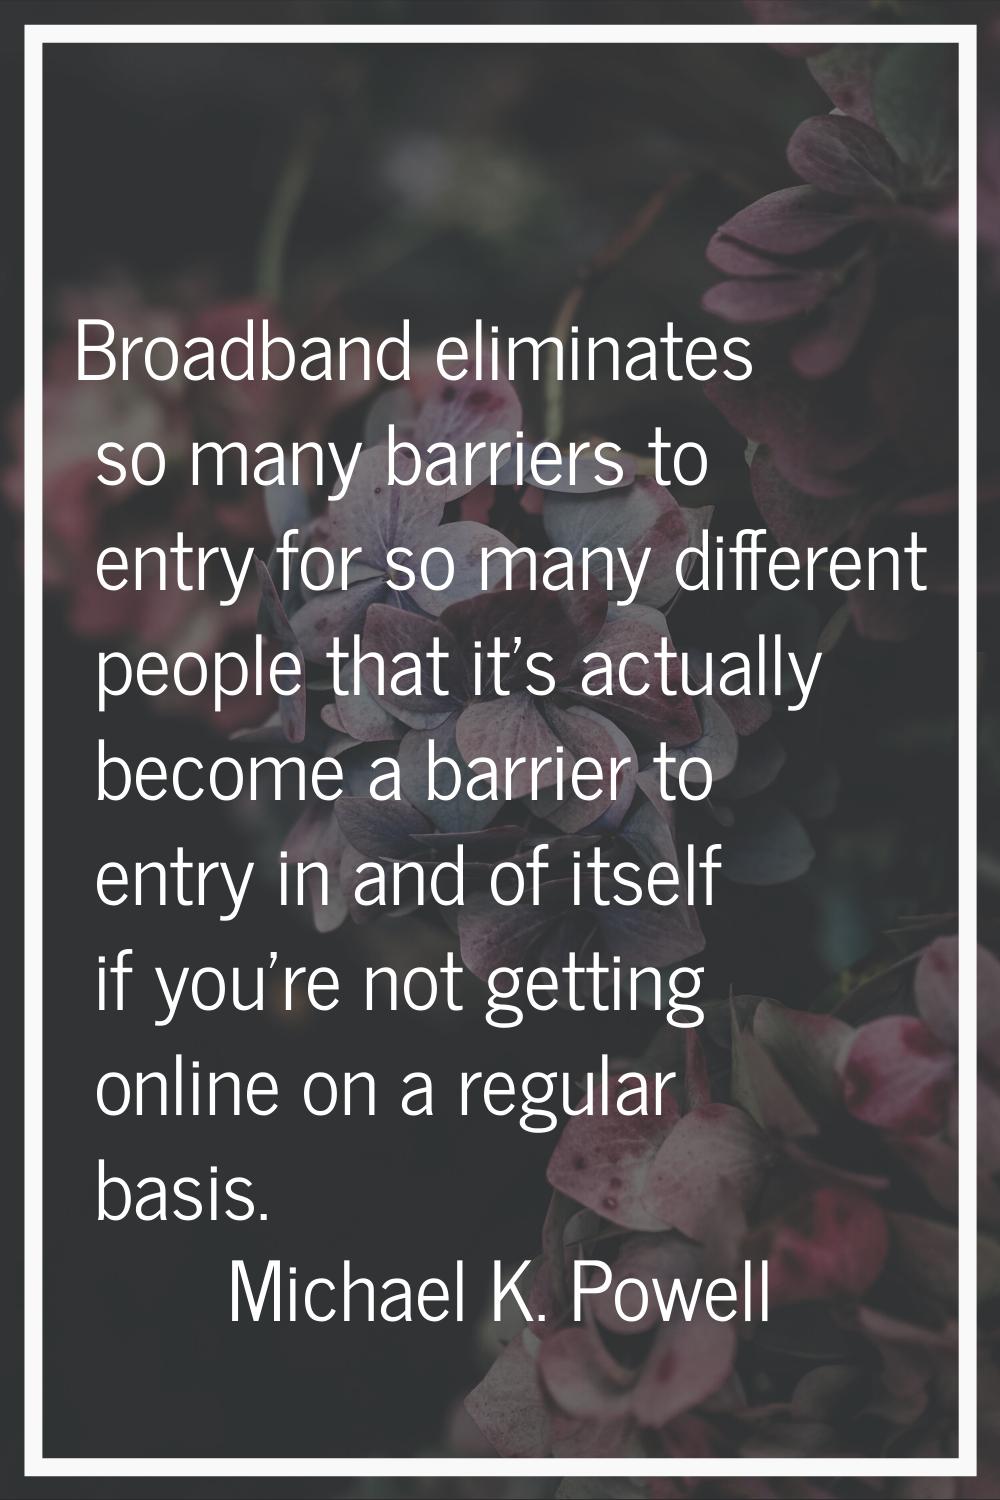 Broadband eliminates so many barriers to entry for so many different people that it's actually beco